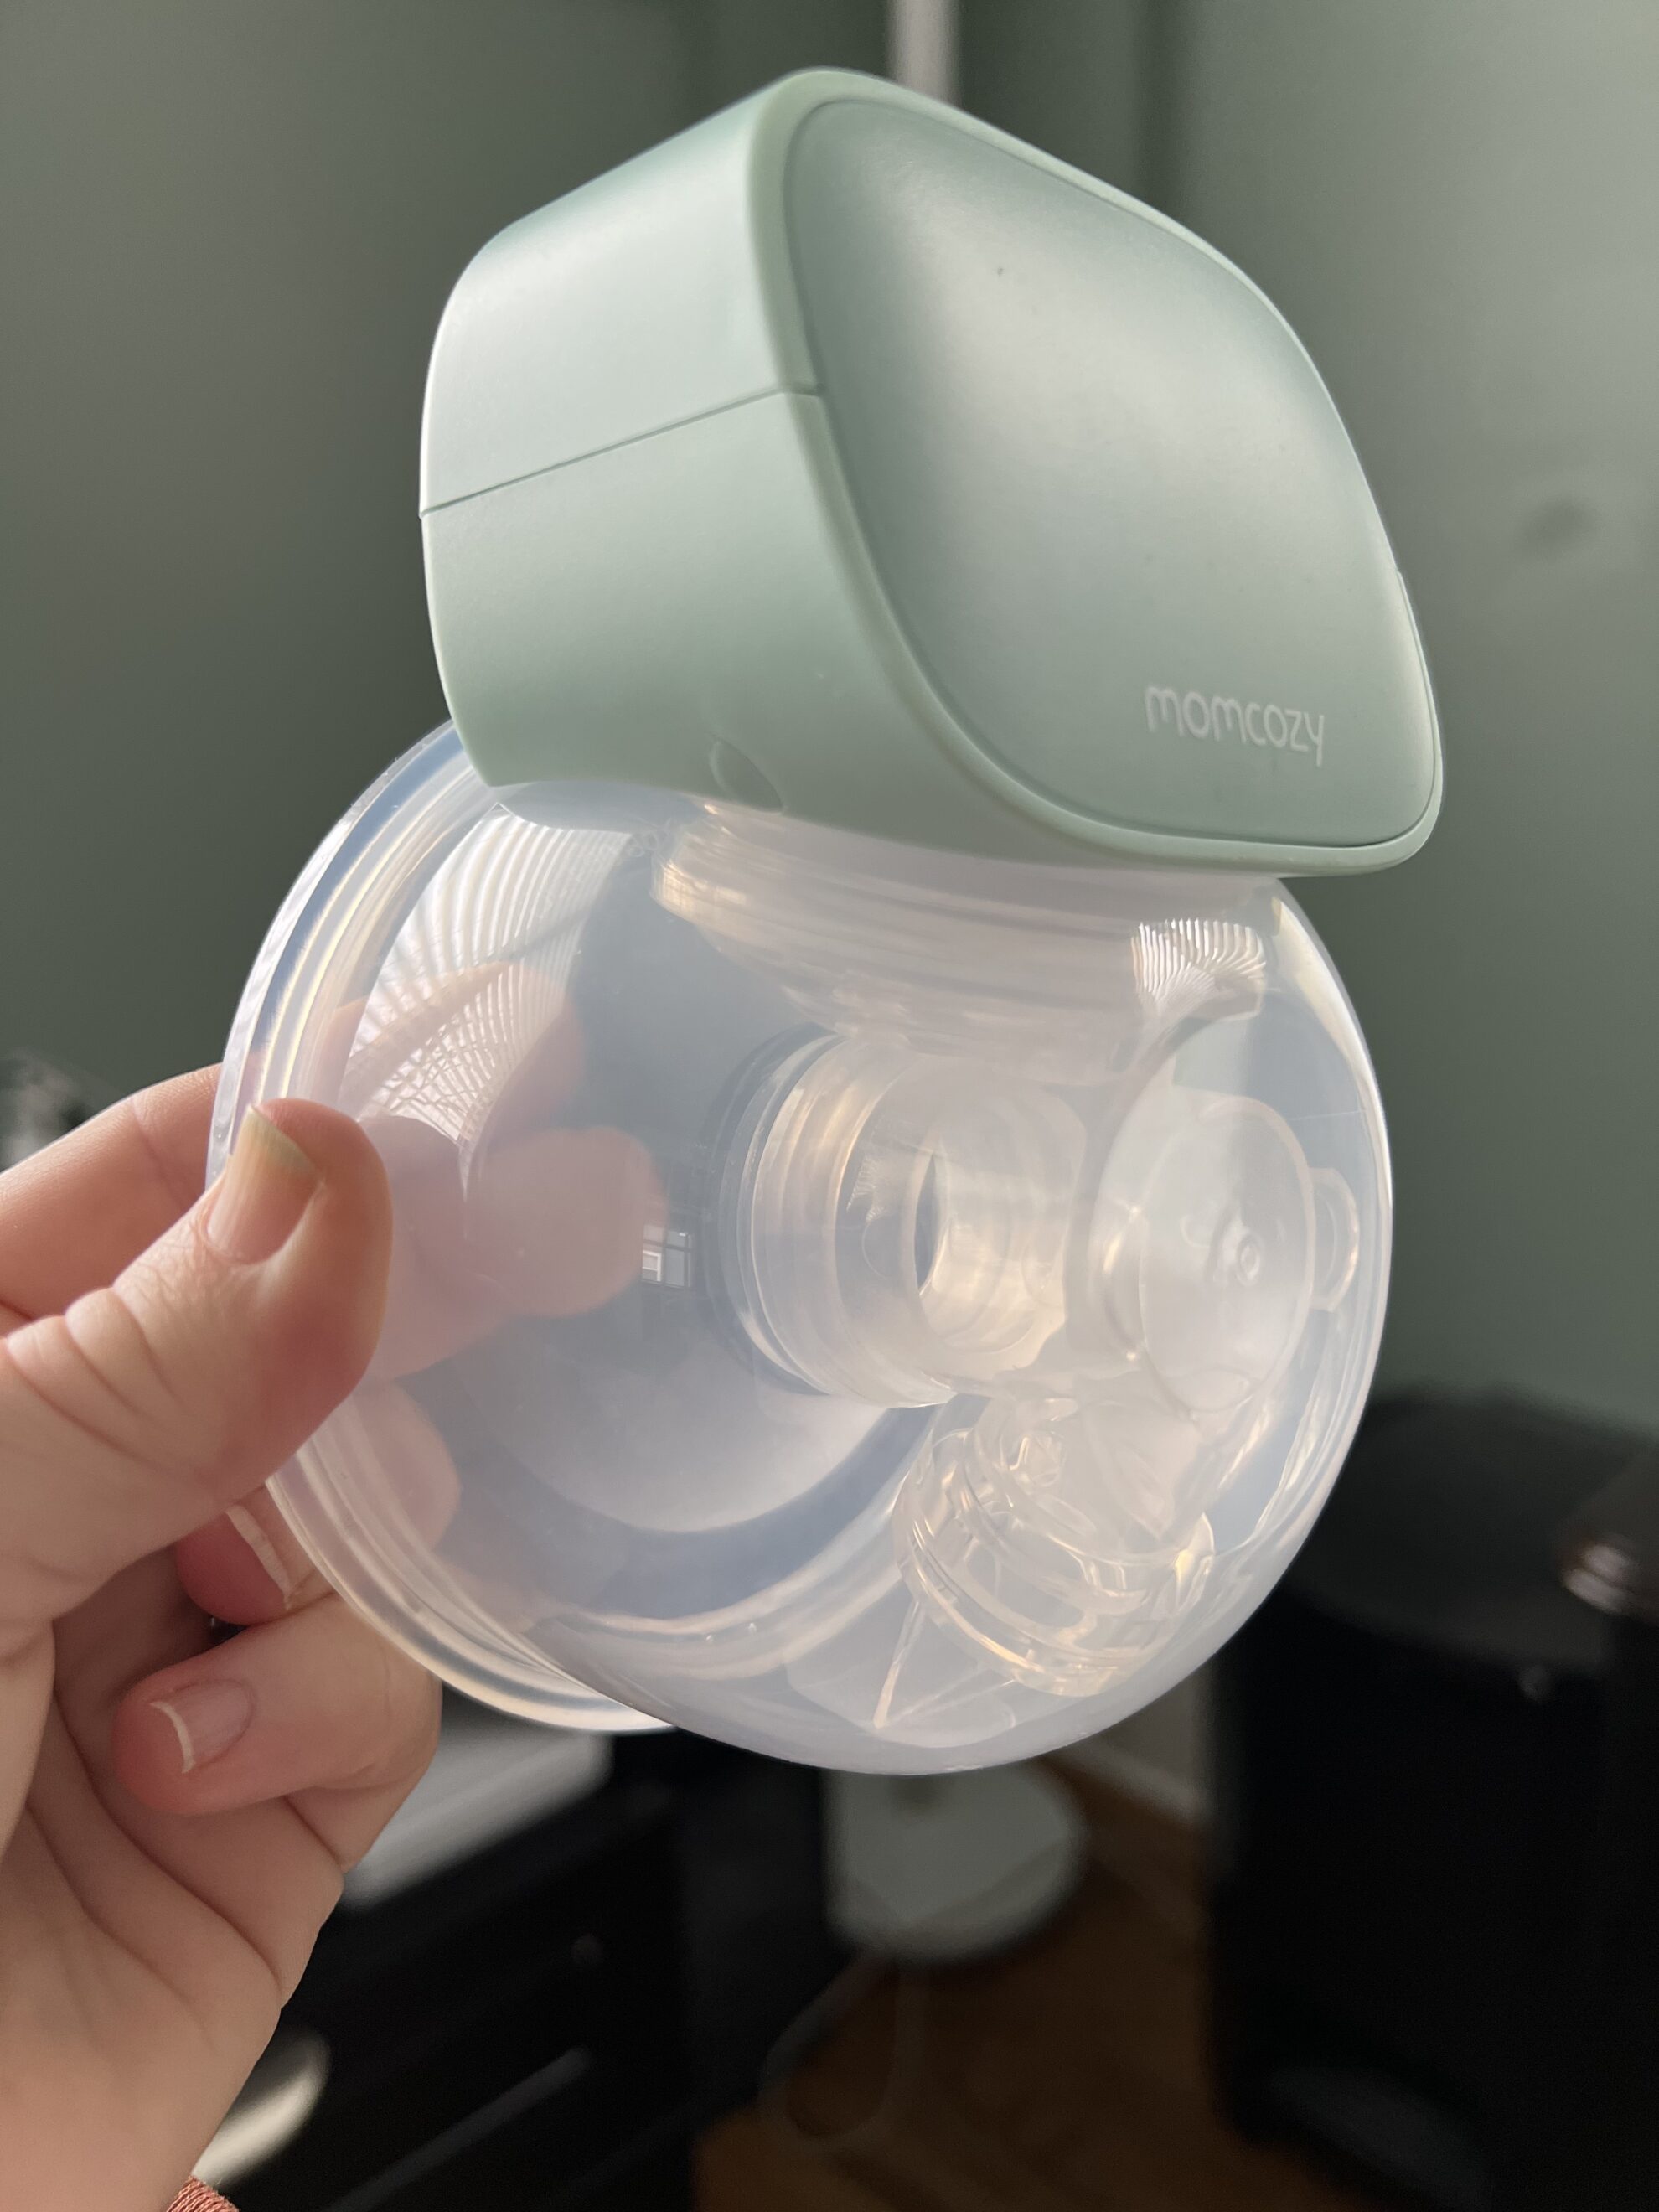 Momcozy Breast Pump Review (2022) - Exclusive Pumping